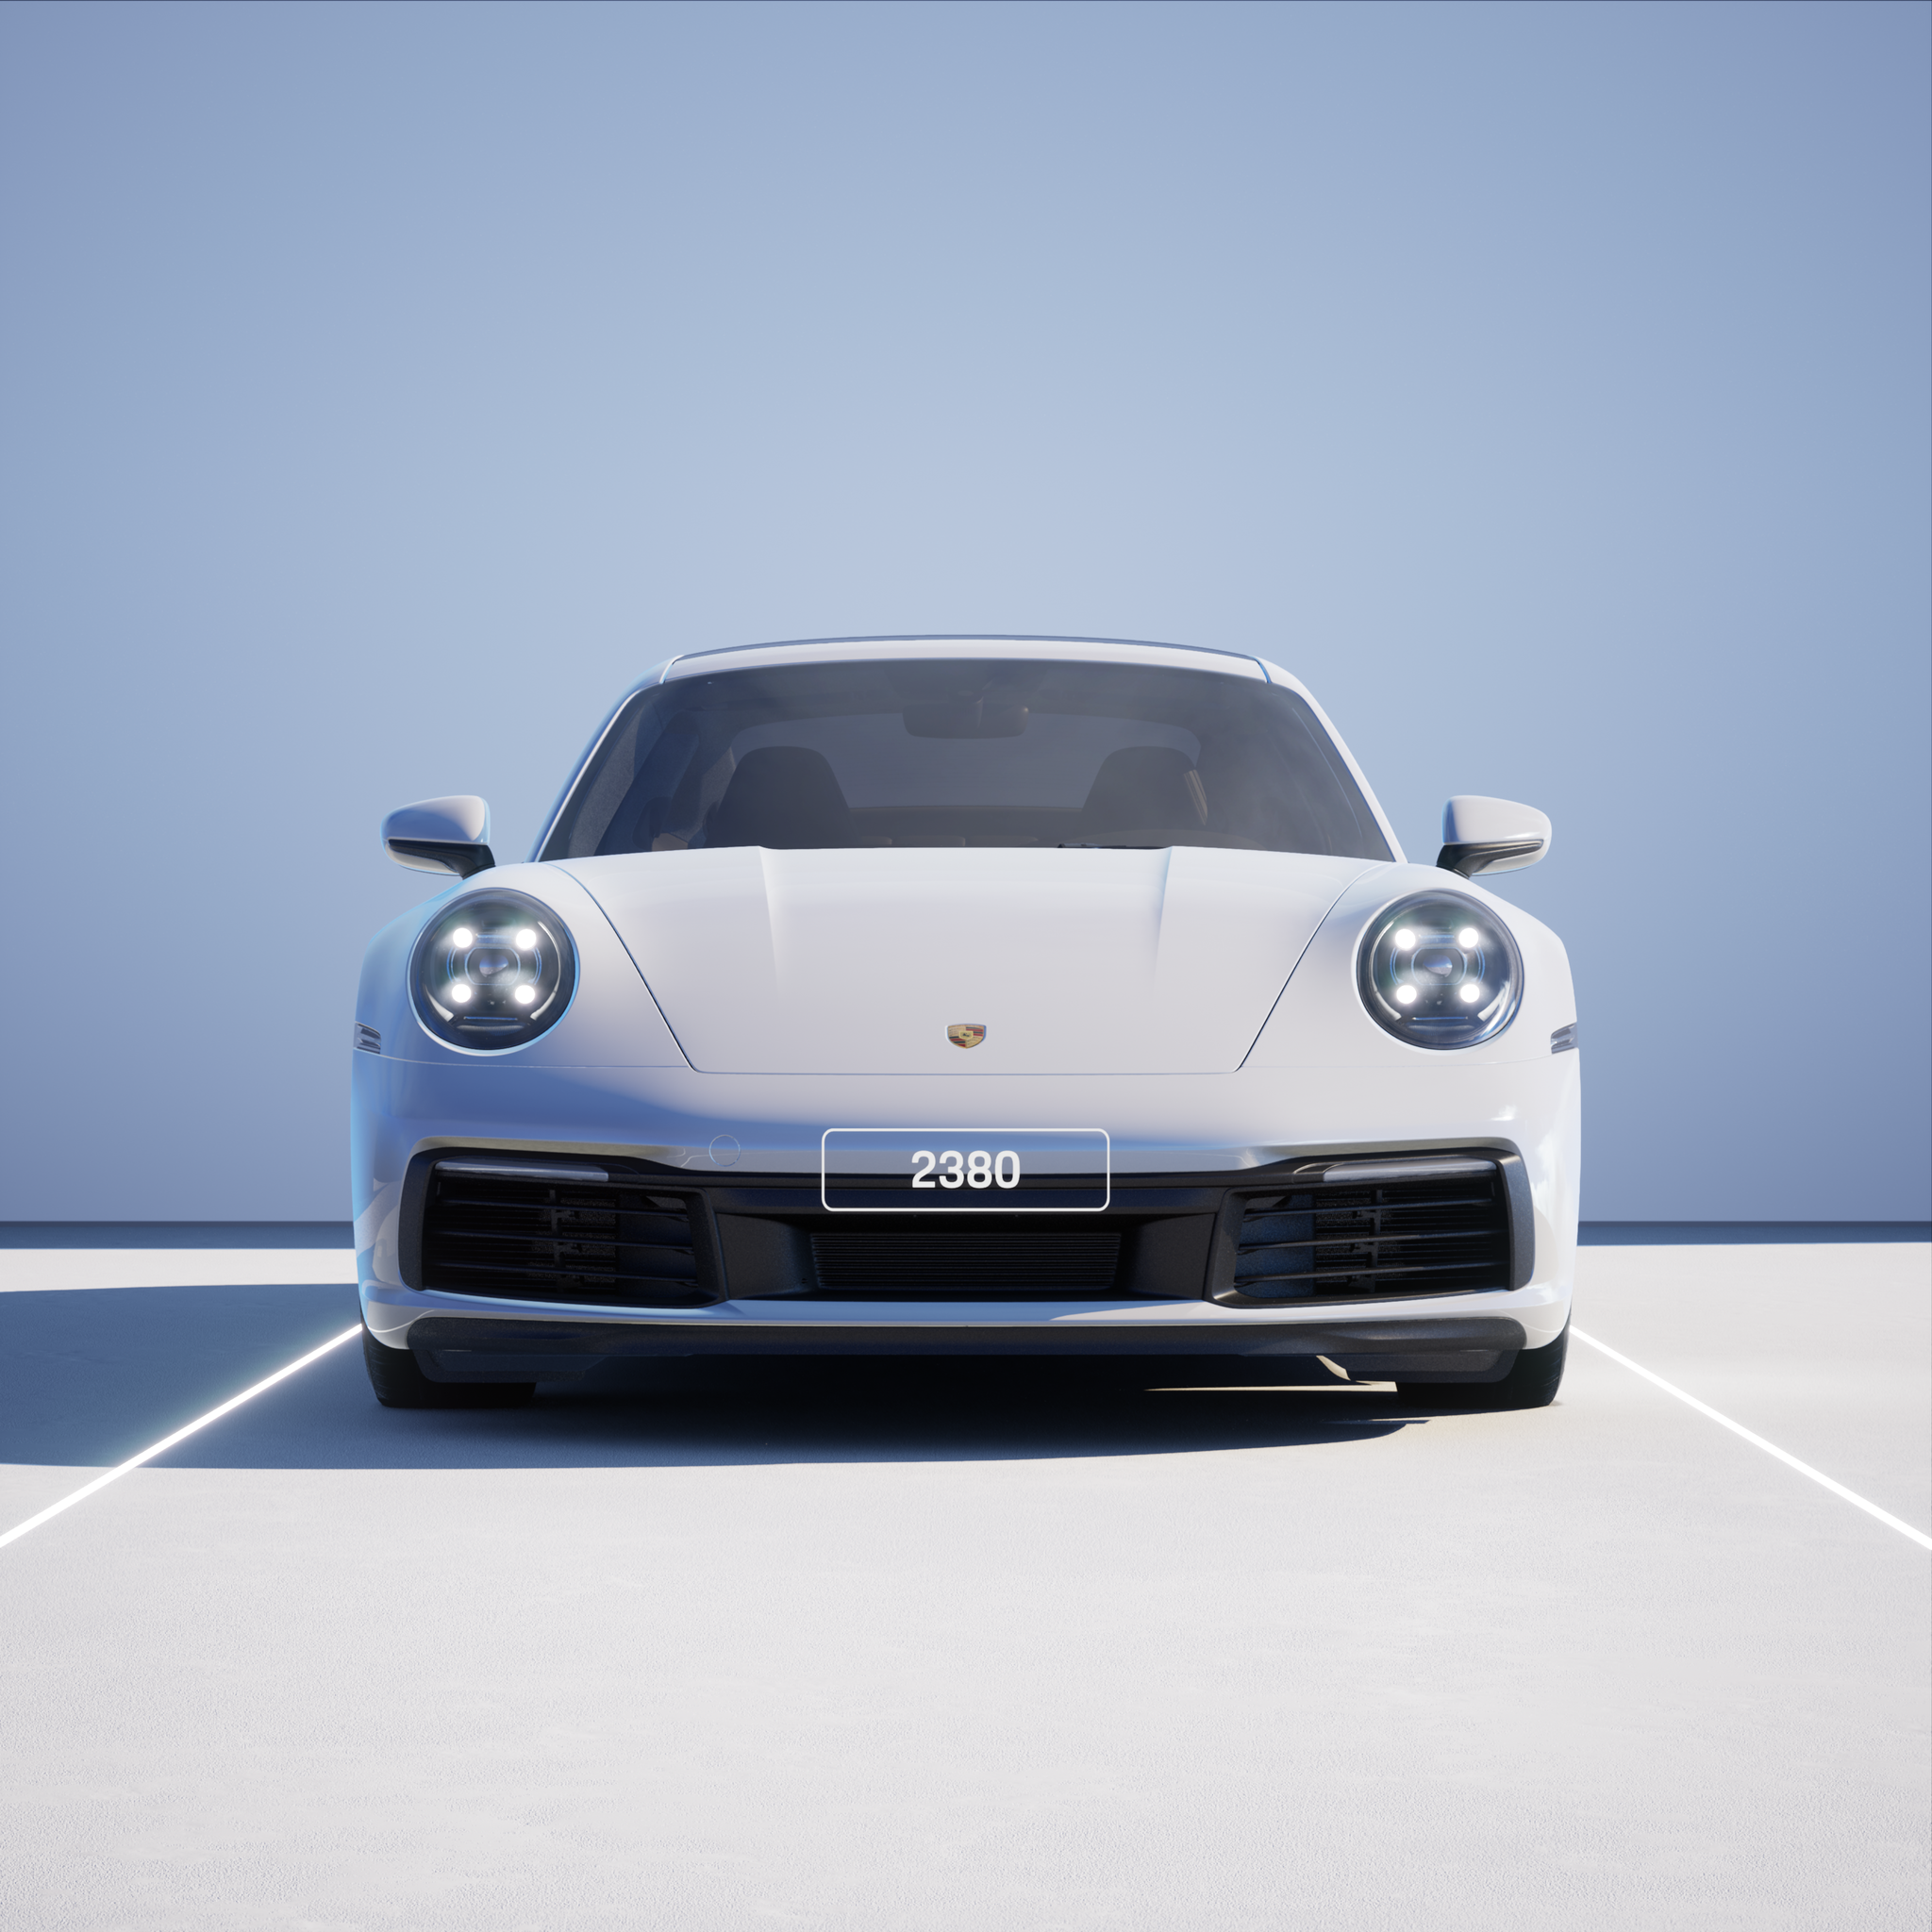 The PORSCHΞ 911 2380 image in phase